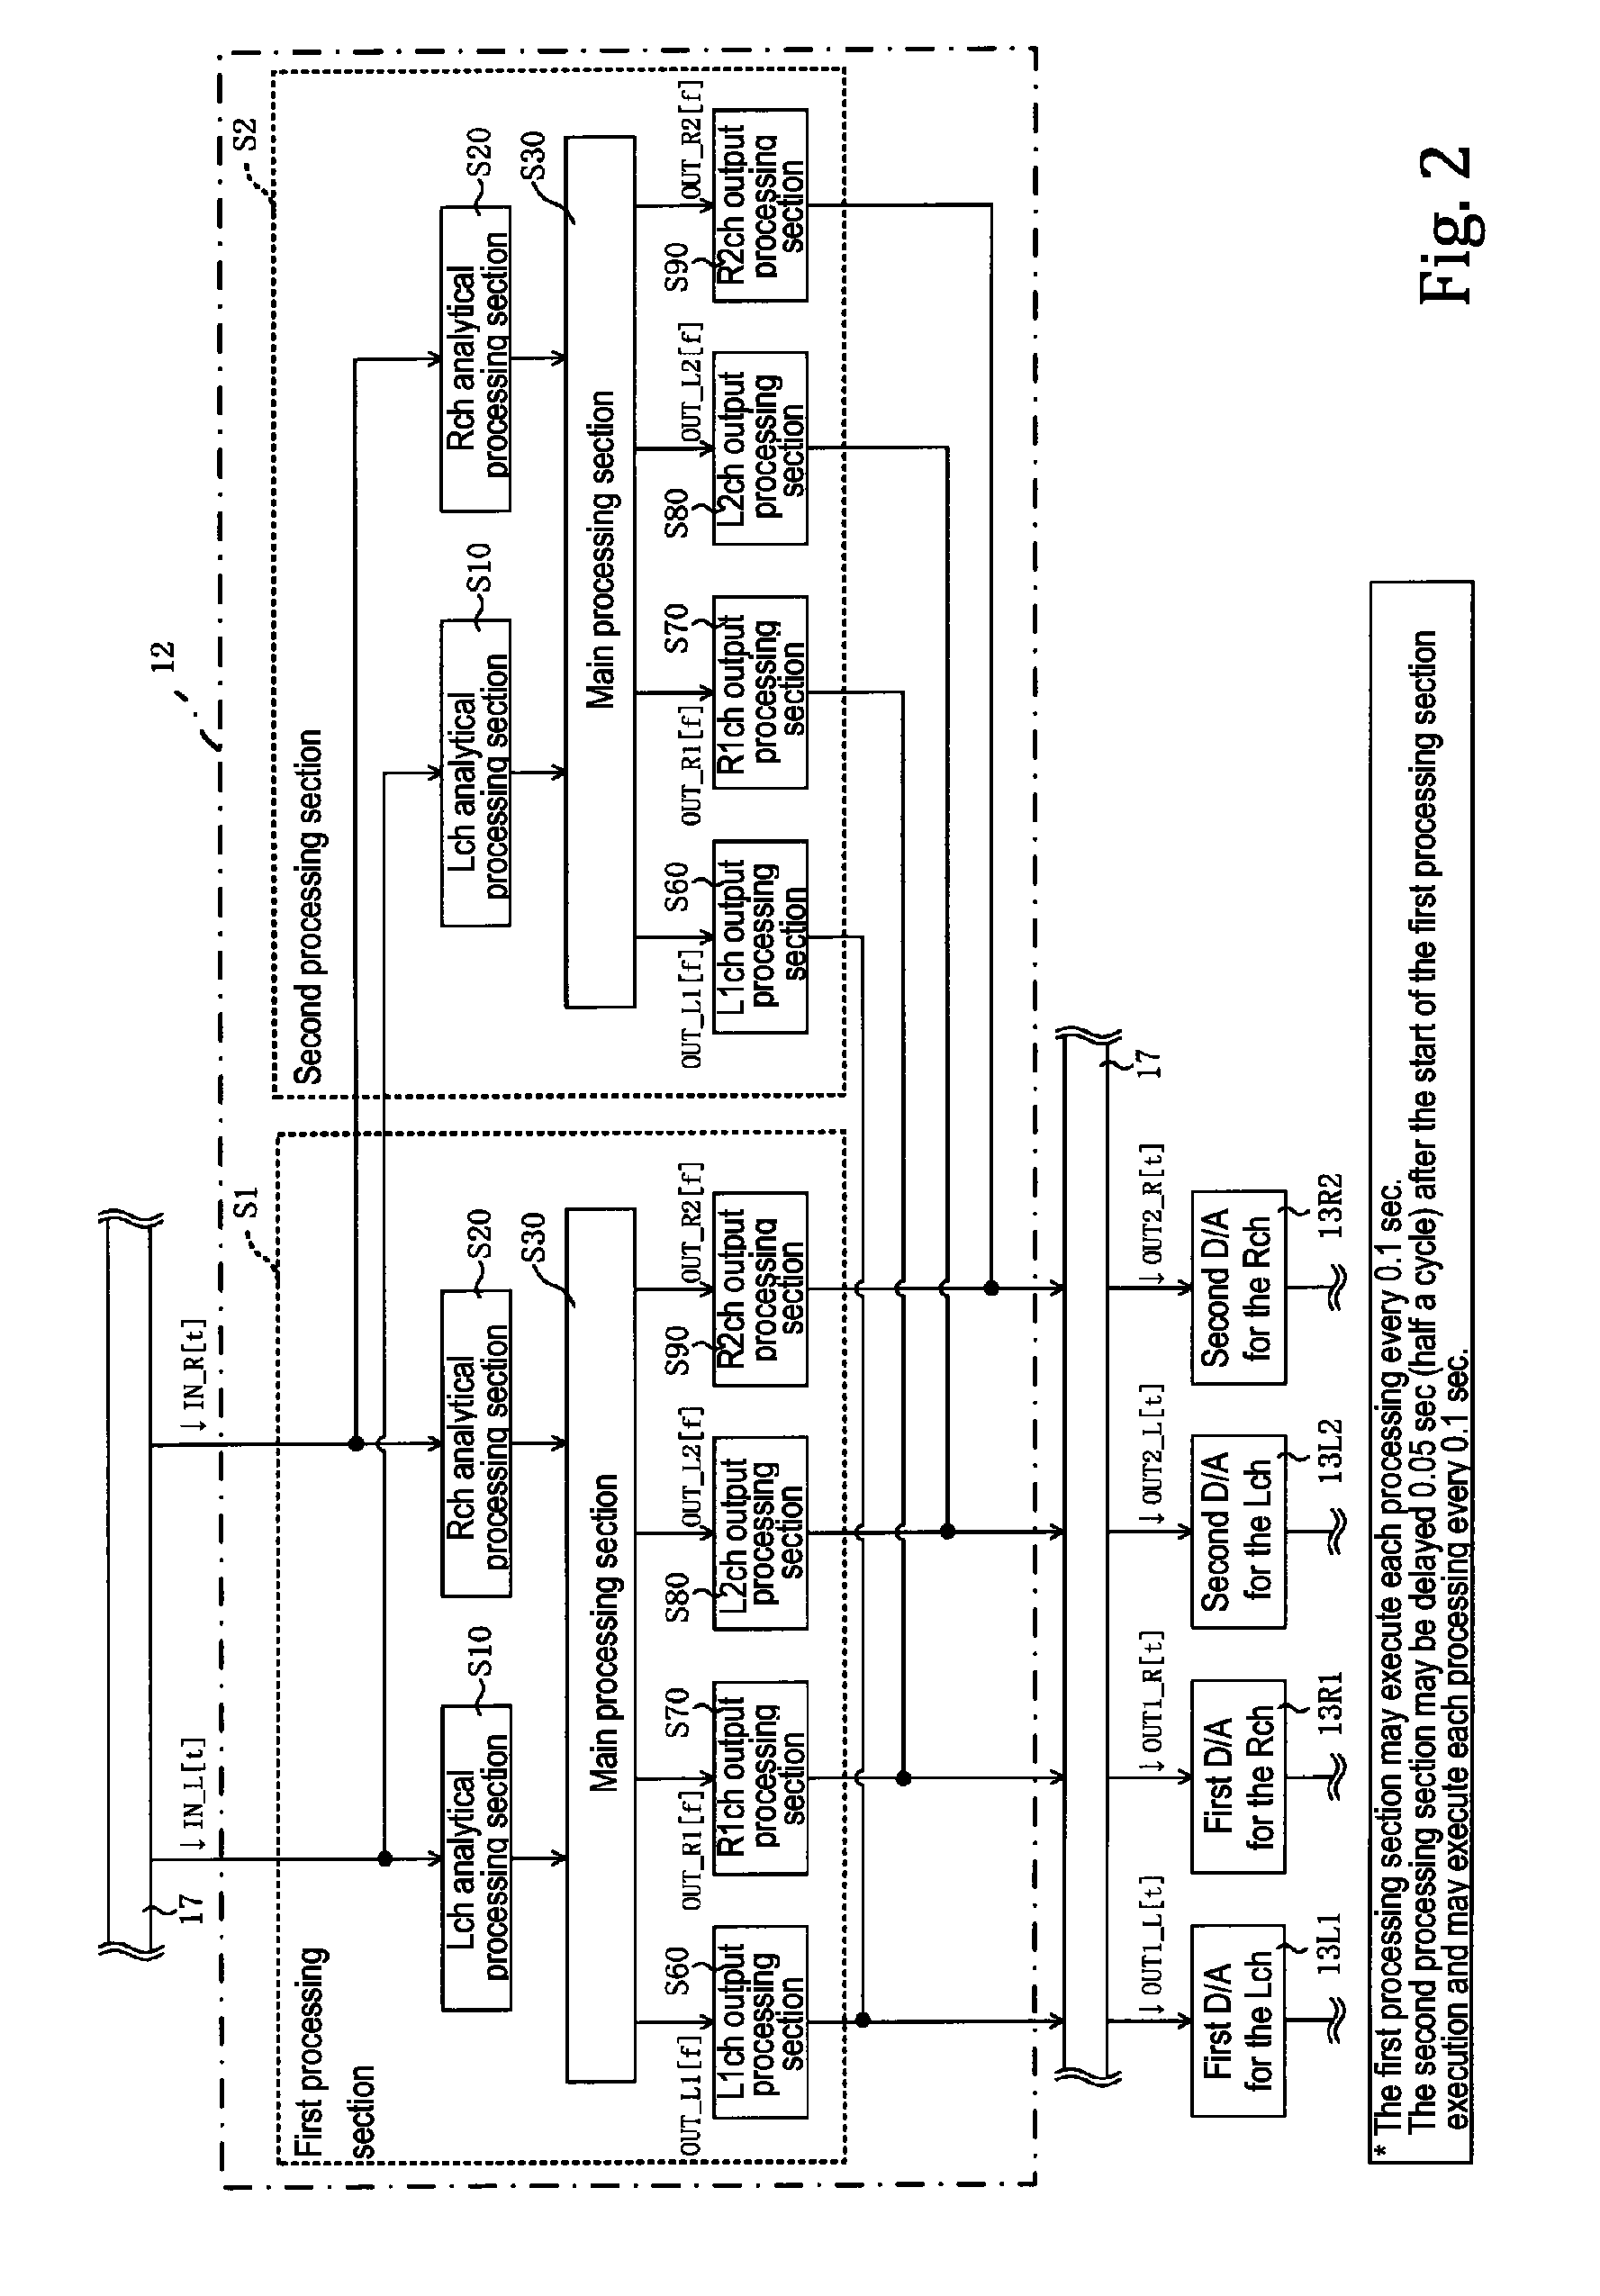 User interface apparatus for displaying vocal or instrumental unit signals in an input musical tone signal